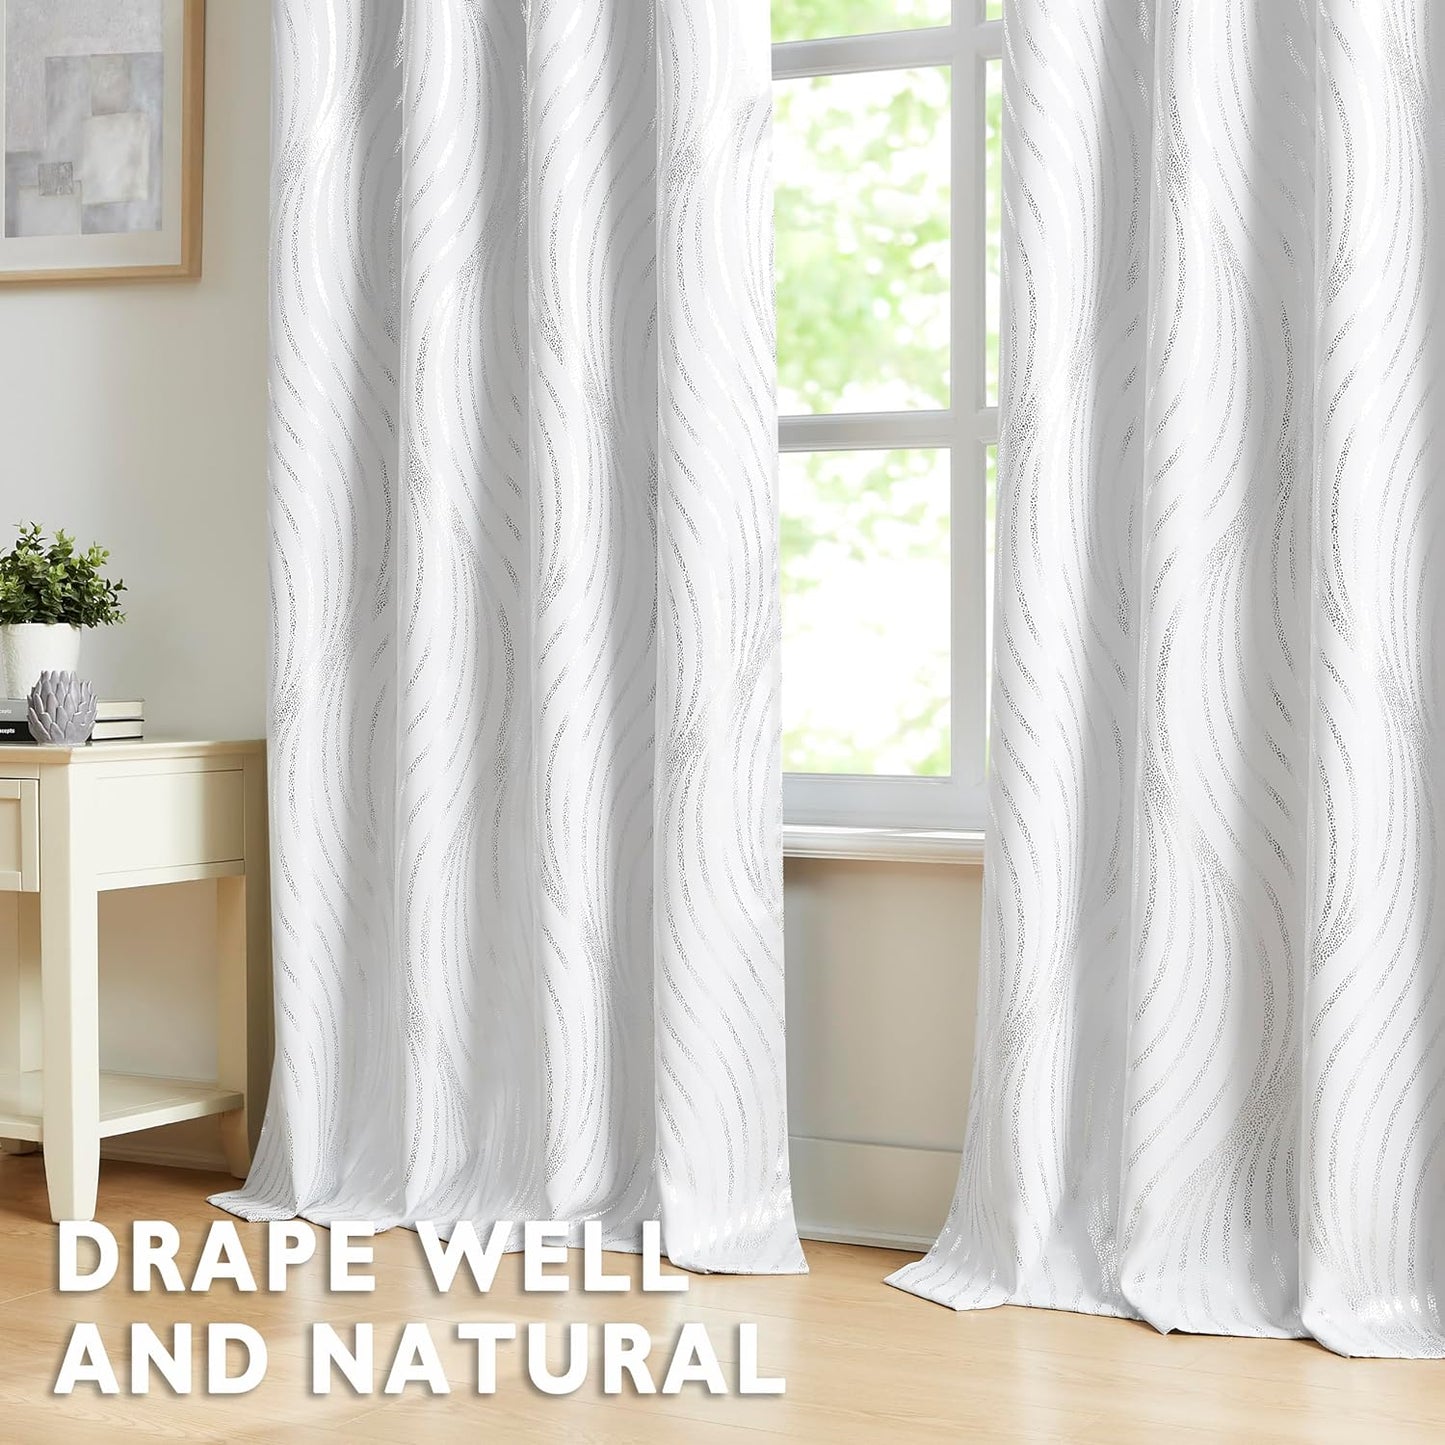 Xwincel Full Blackout Curtains with Silver Metallic Wave Print,84 Inches Long Thermal Insulated Sound Proof Window Treatments for Living Room Bedroom, Grommets Top Design,White,52W X 84L,2 Panel Sets  Xwincel   